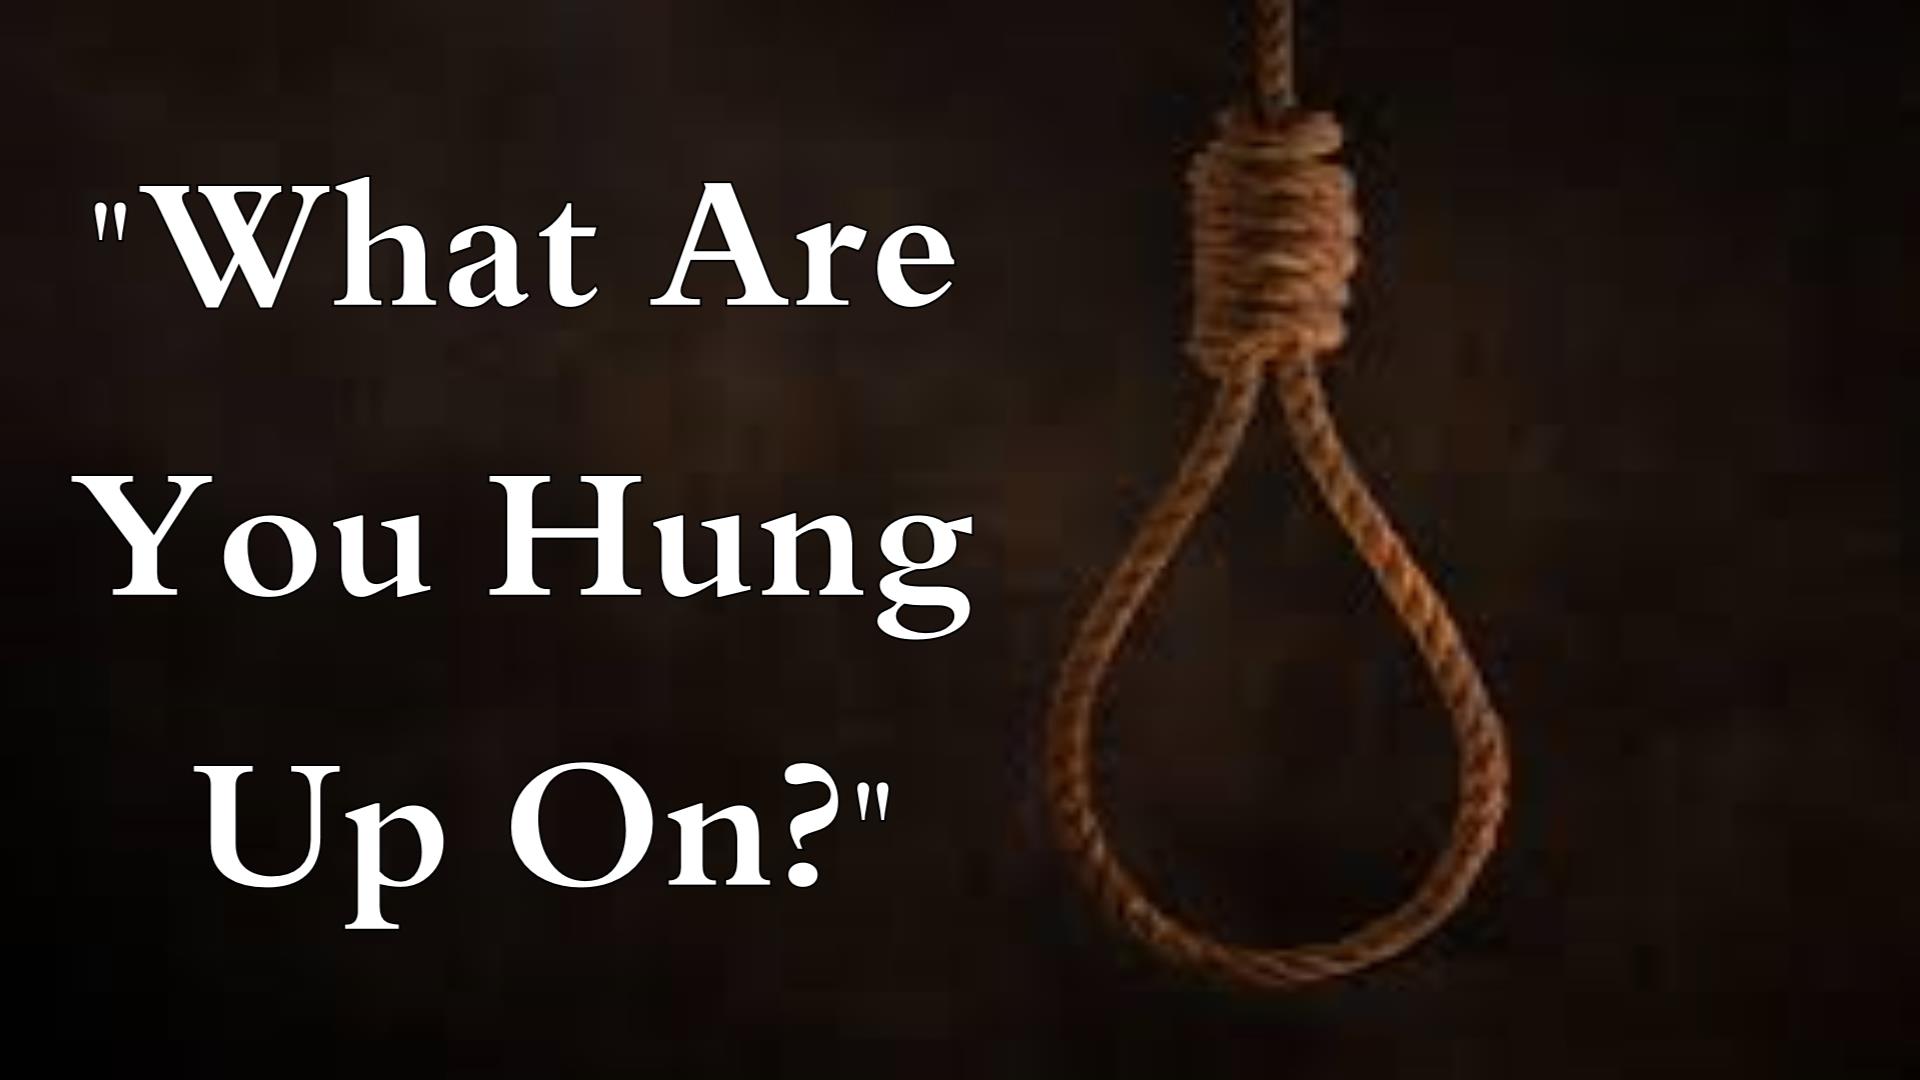 WHAT ARE YOU HUNG UP ON?